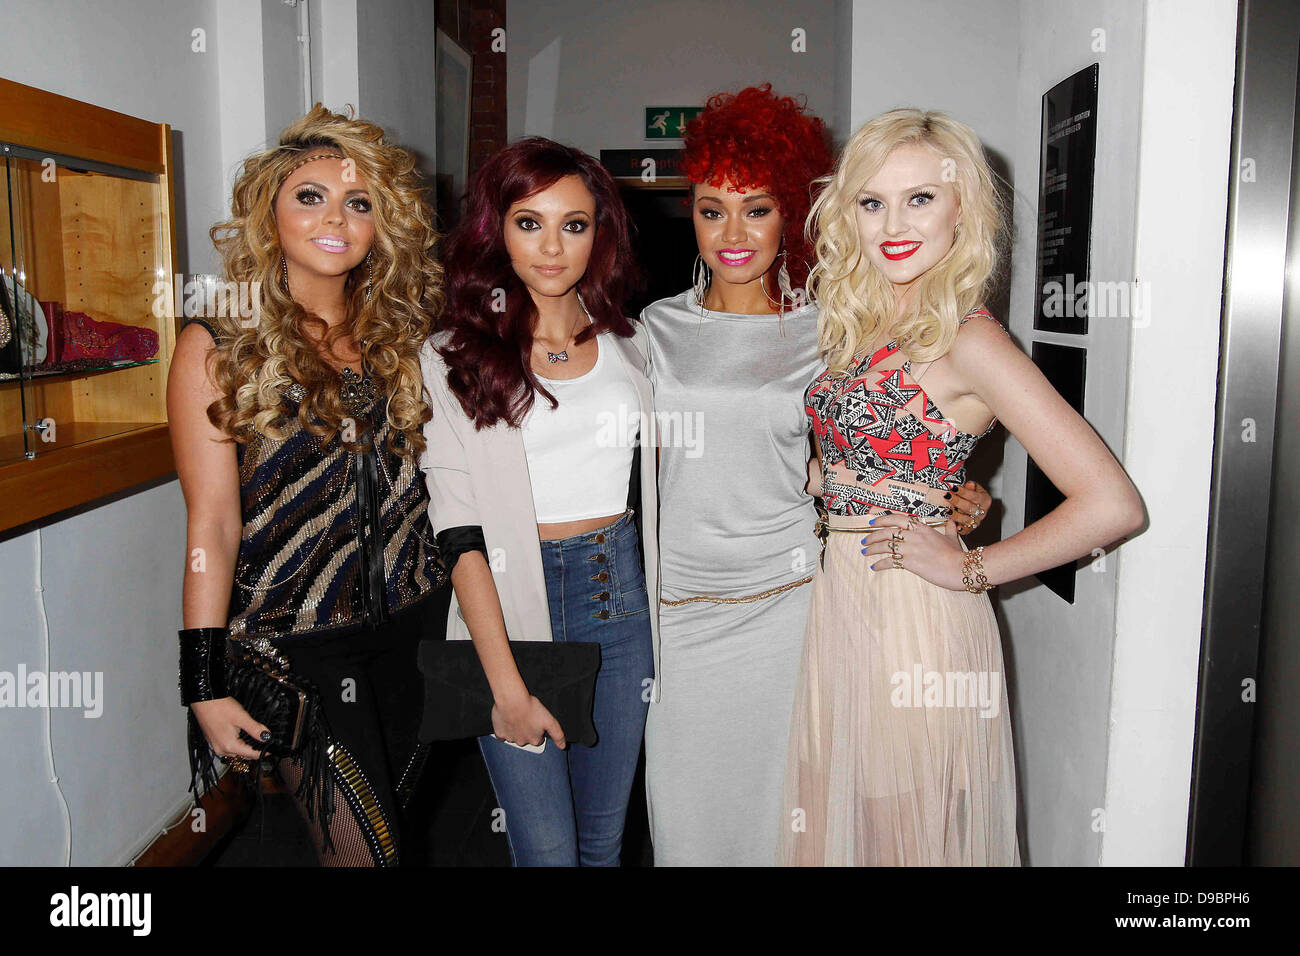 Jesy Nelson, Jade Thirlwall, Leigh-Ann Pinnock, Perrie Edwards of Little Mix    Raymond Weil Pre-Brits Awards Dinner    Labrinth hosts strictly invitation only dinner sponsored by the official watch of next month's Brit Awards.  Mosaica Restaurant, The Chocolate Factory  London, England - 26.01.12        +++++  NO UK  PAPERS  +++++++ ***Not Available for Publication in the Daily Ex Stock Photo